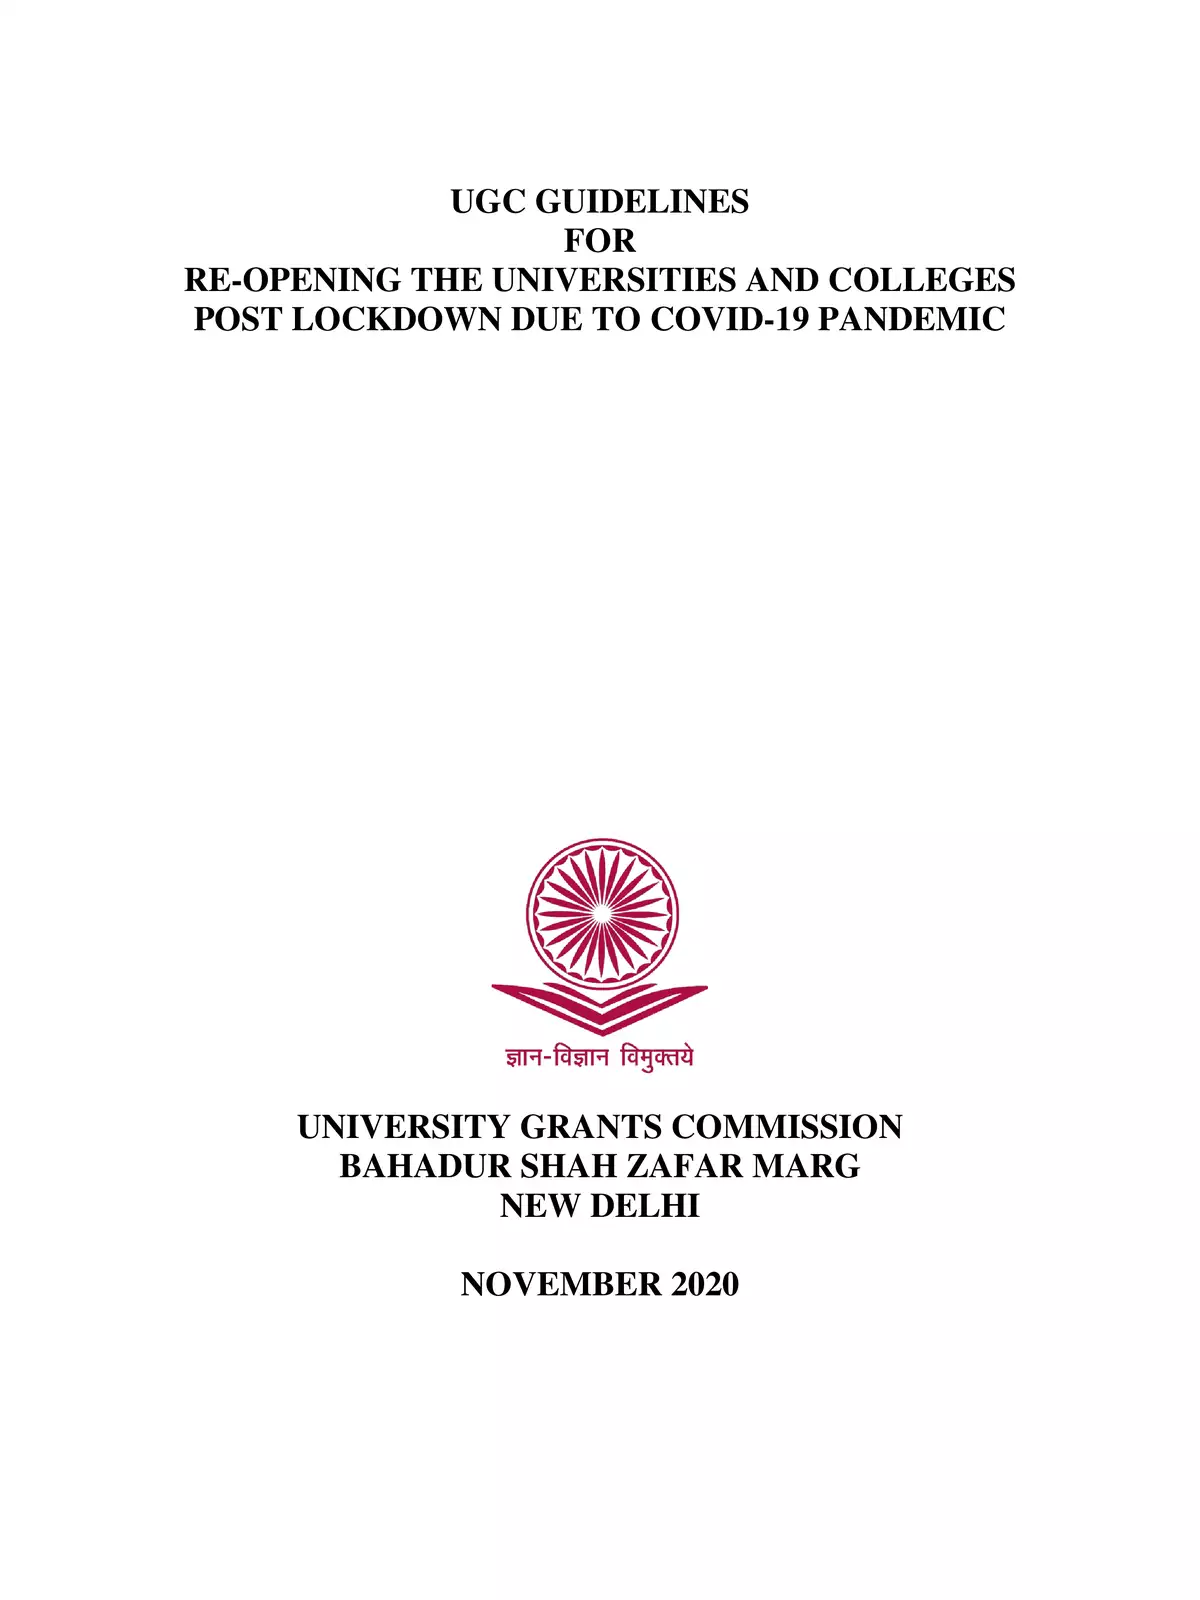 UGC Guidelines for Re-opening of University